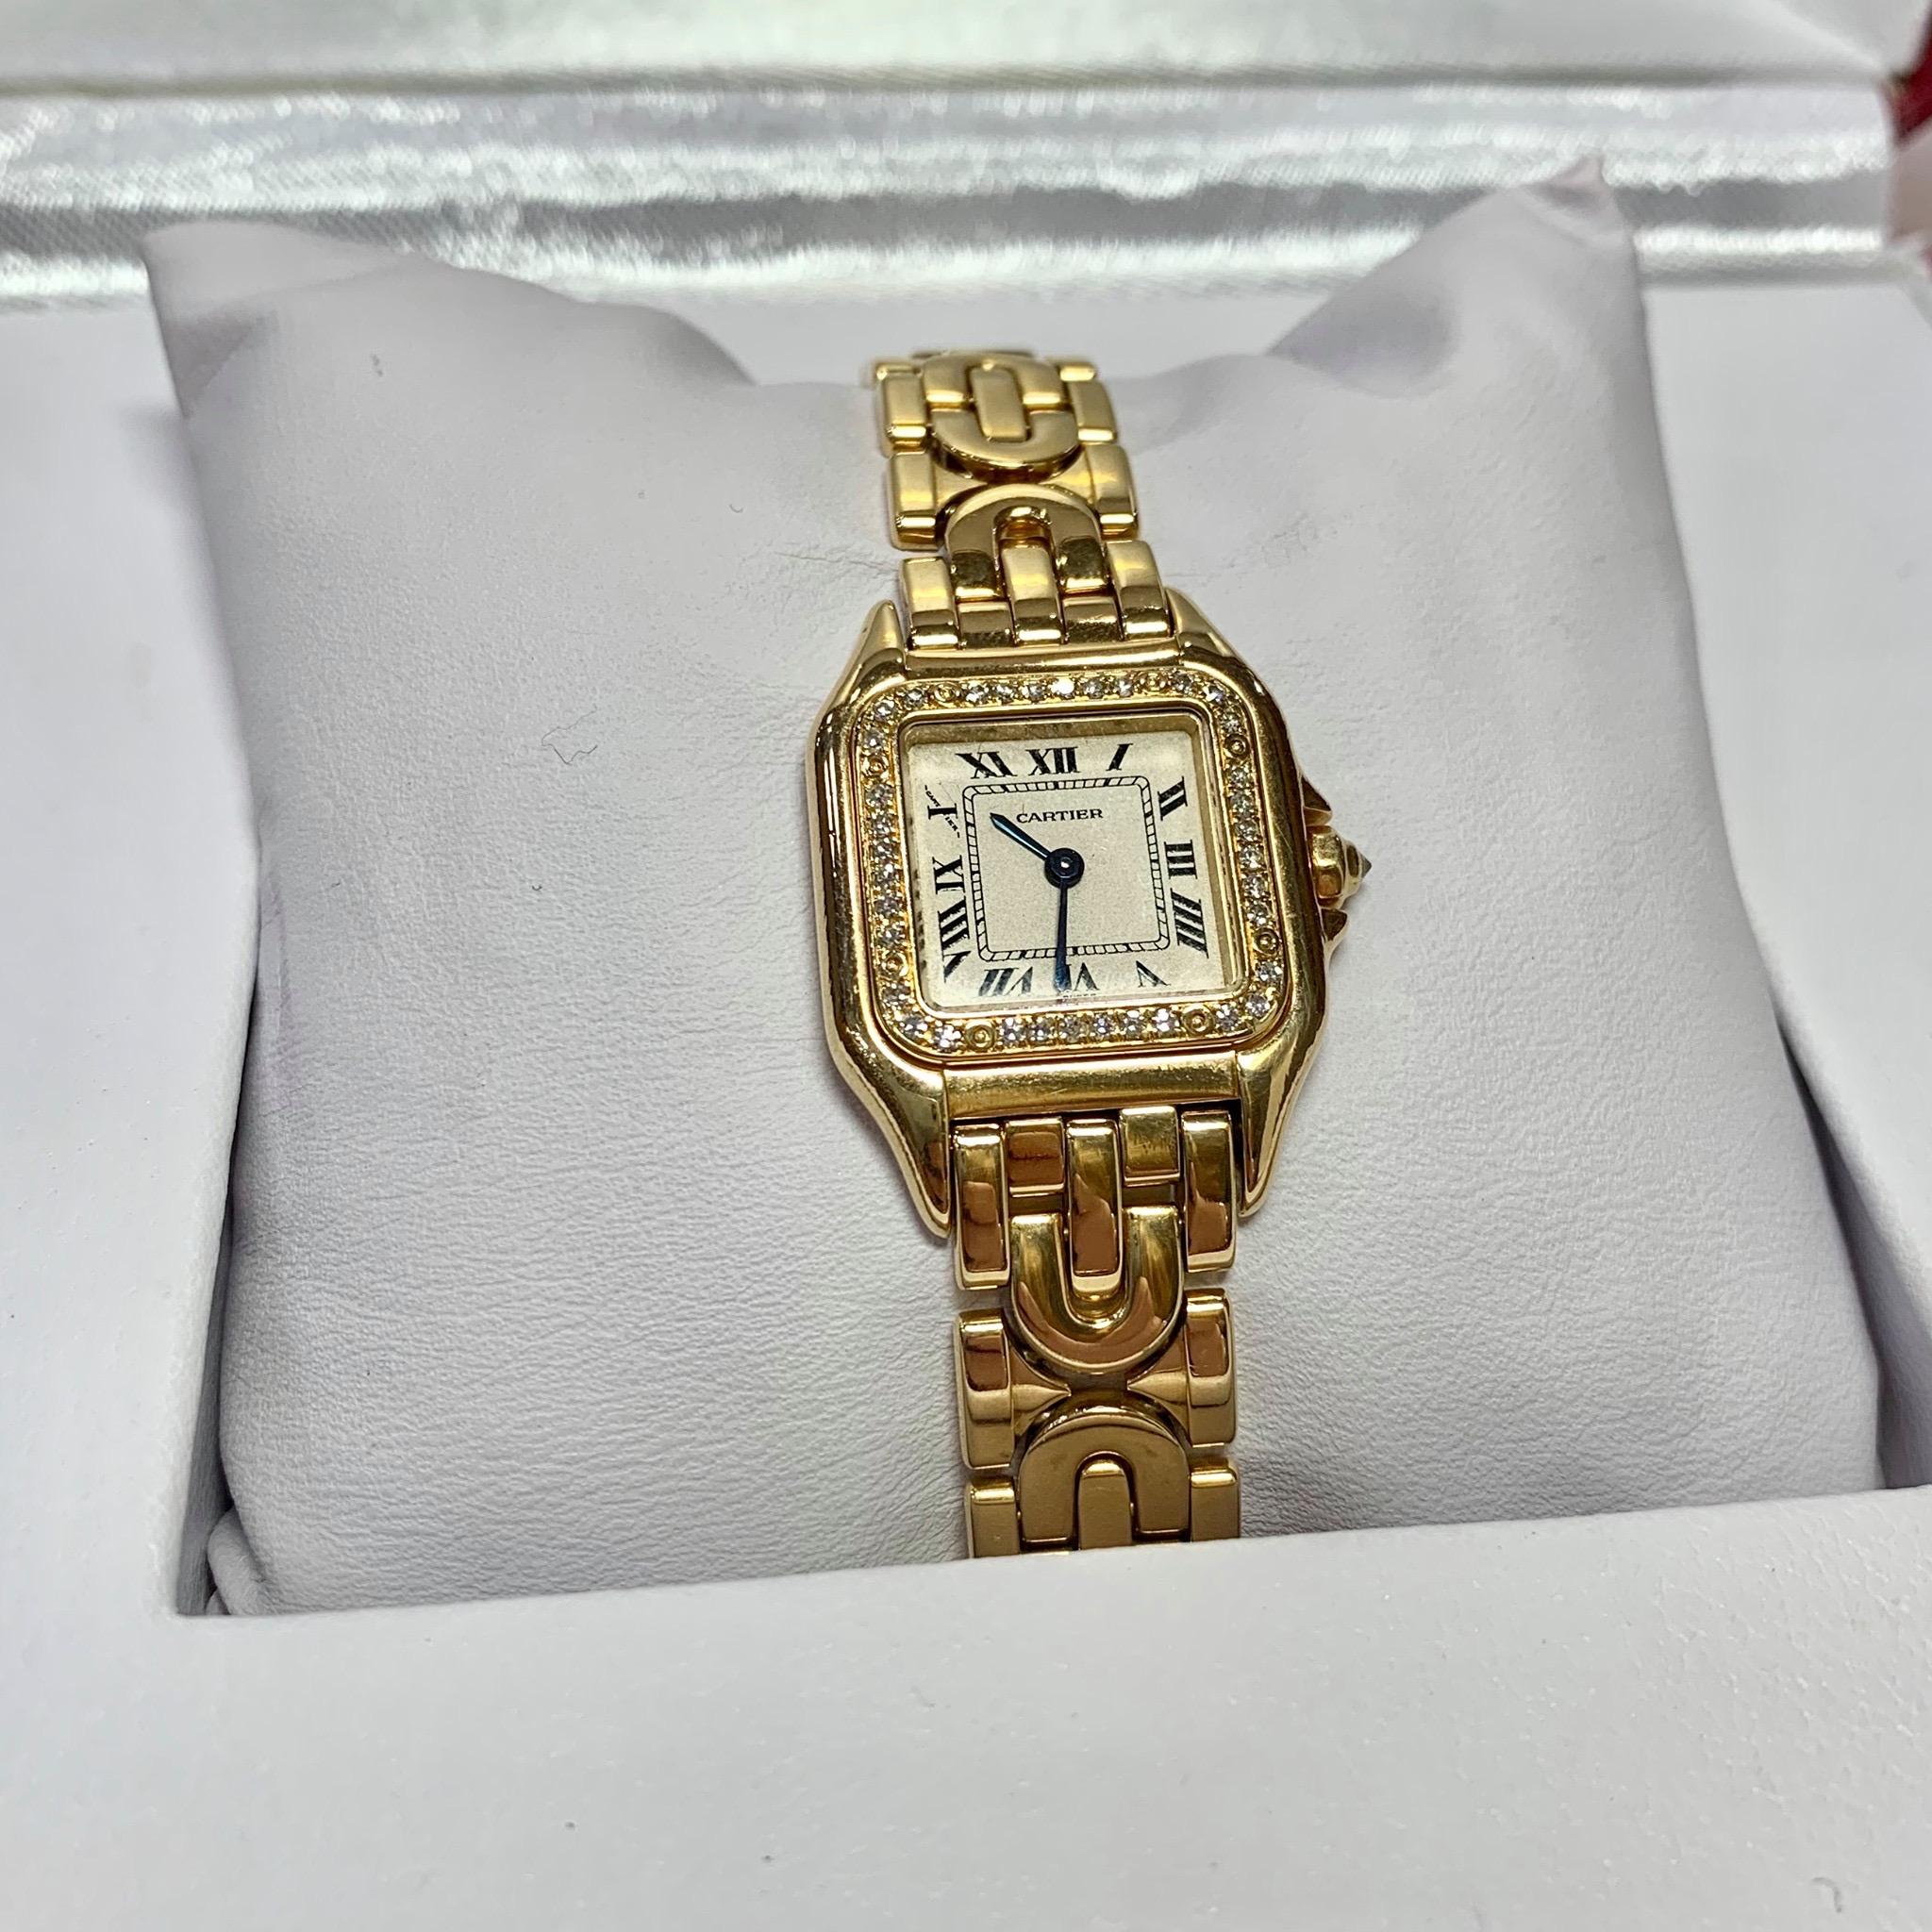 Cartier Panthere Yellow Gold Diamond Ladies Watch. On a rare 18ct Yellow gold strap. With a cream dial with black Roman numeral hour markers. Set with 36 round brilliant cut Diamonds on the bezel. Quartz movement.
In original box.

Diameter :